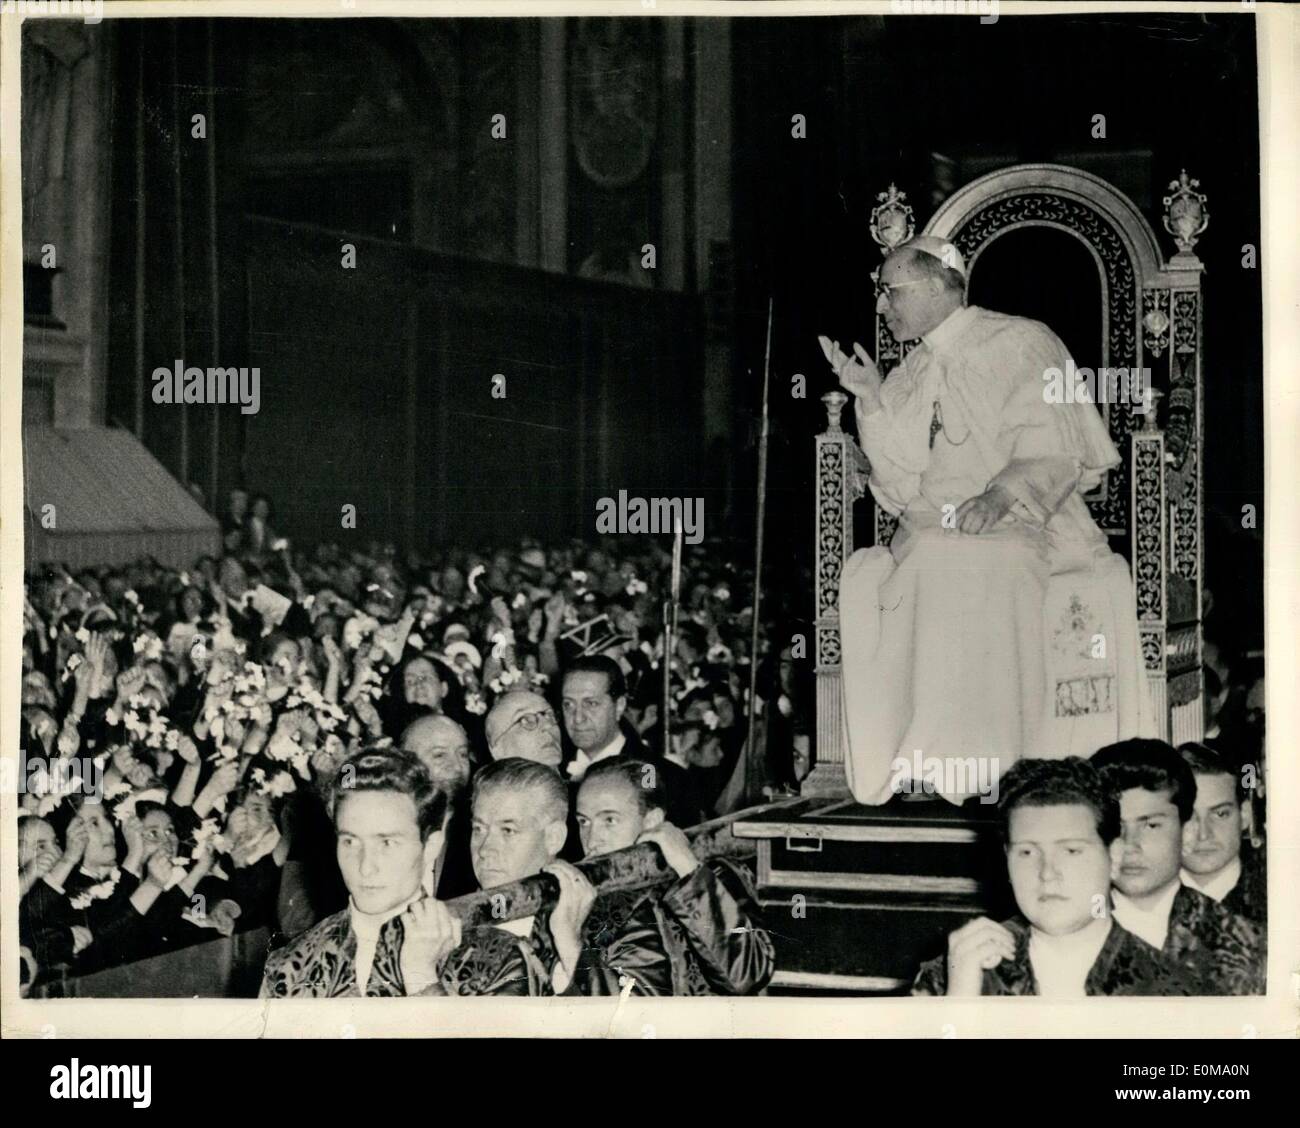 May 04, 1954 - Pope Holds First Public Audience Since His Recent Illness: The Holy Father Pope Pius XII held his first public audience since his recent illness at St. Peter's Cathedral - when he received 20,000 children from schools throughout Italy. Photo shows The Pope is carried in State at St. Peter's Cathedral - during the ceremonies. Stock Photo